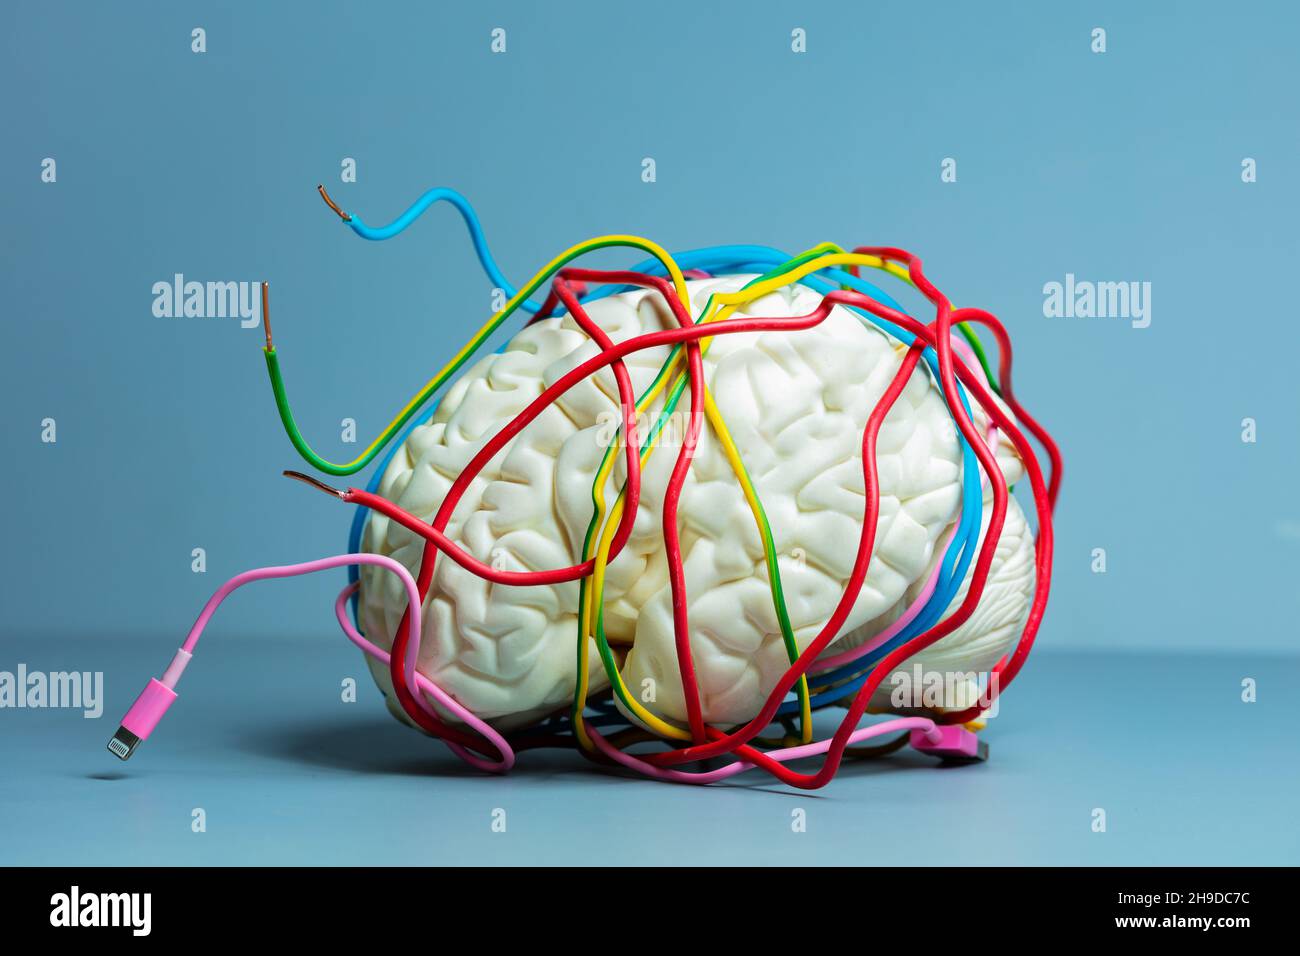 Concept of digital confusion brain trapped in wire Stock Photo